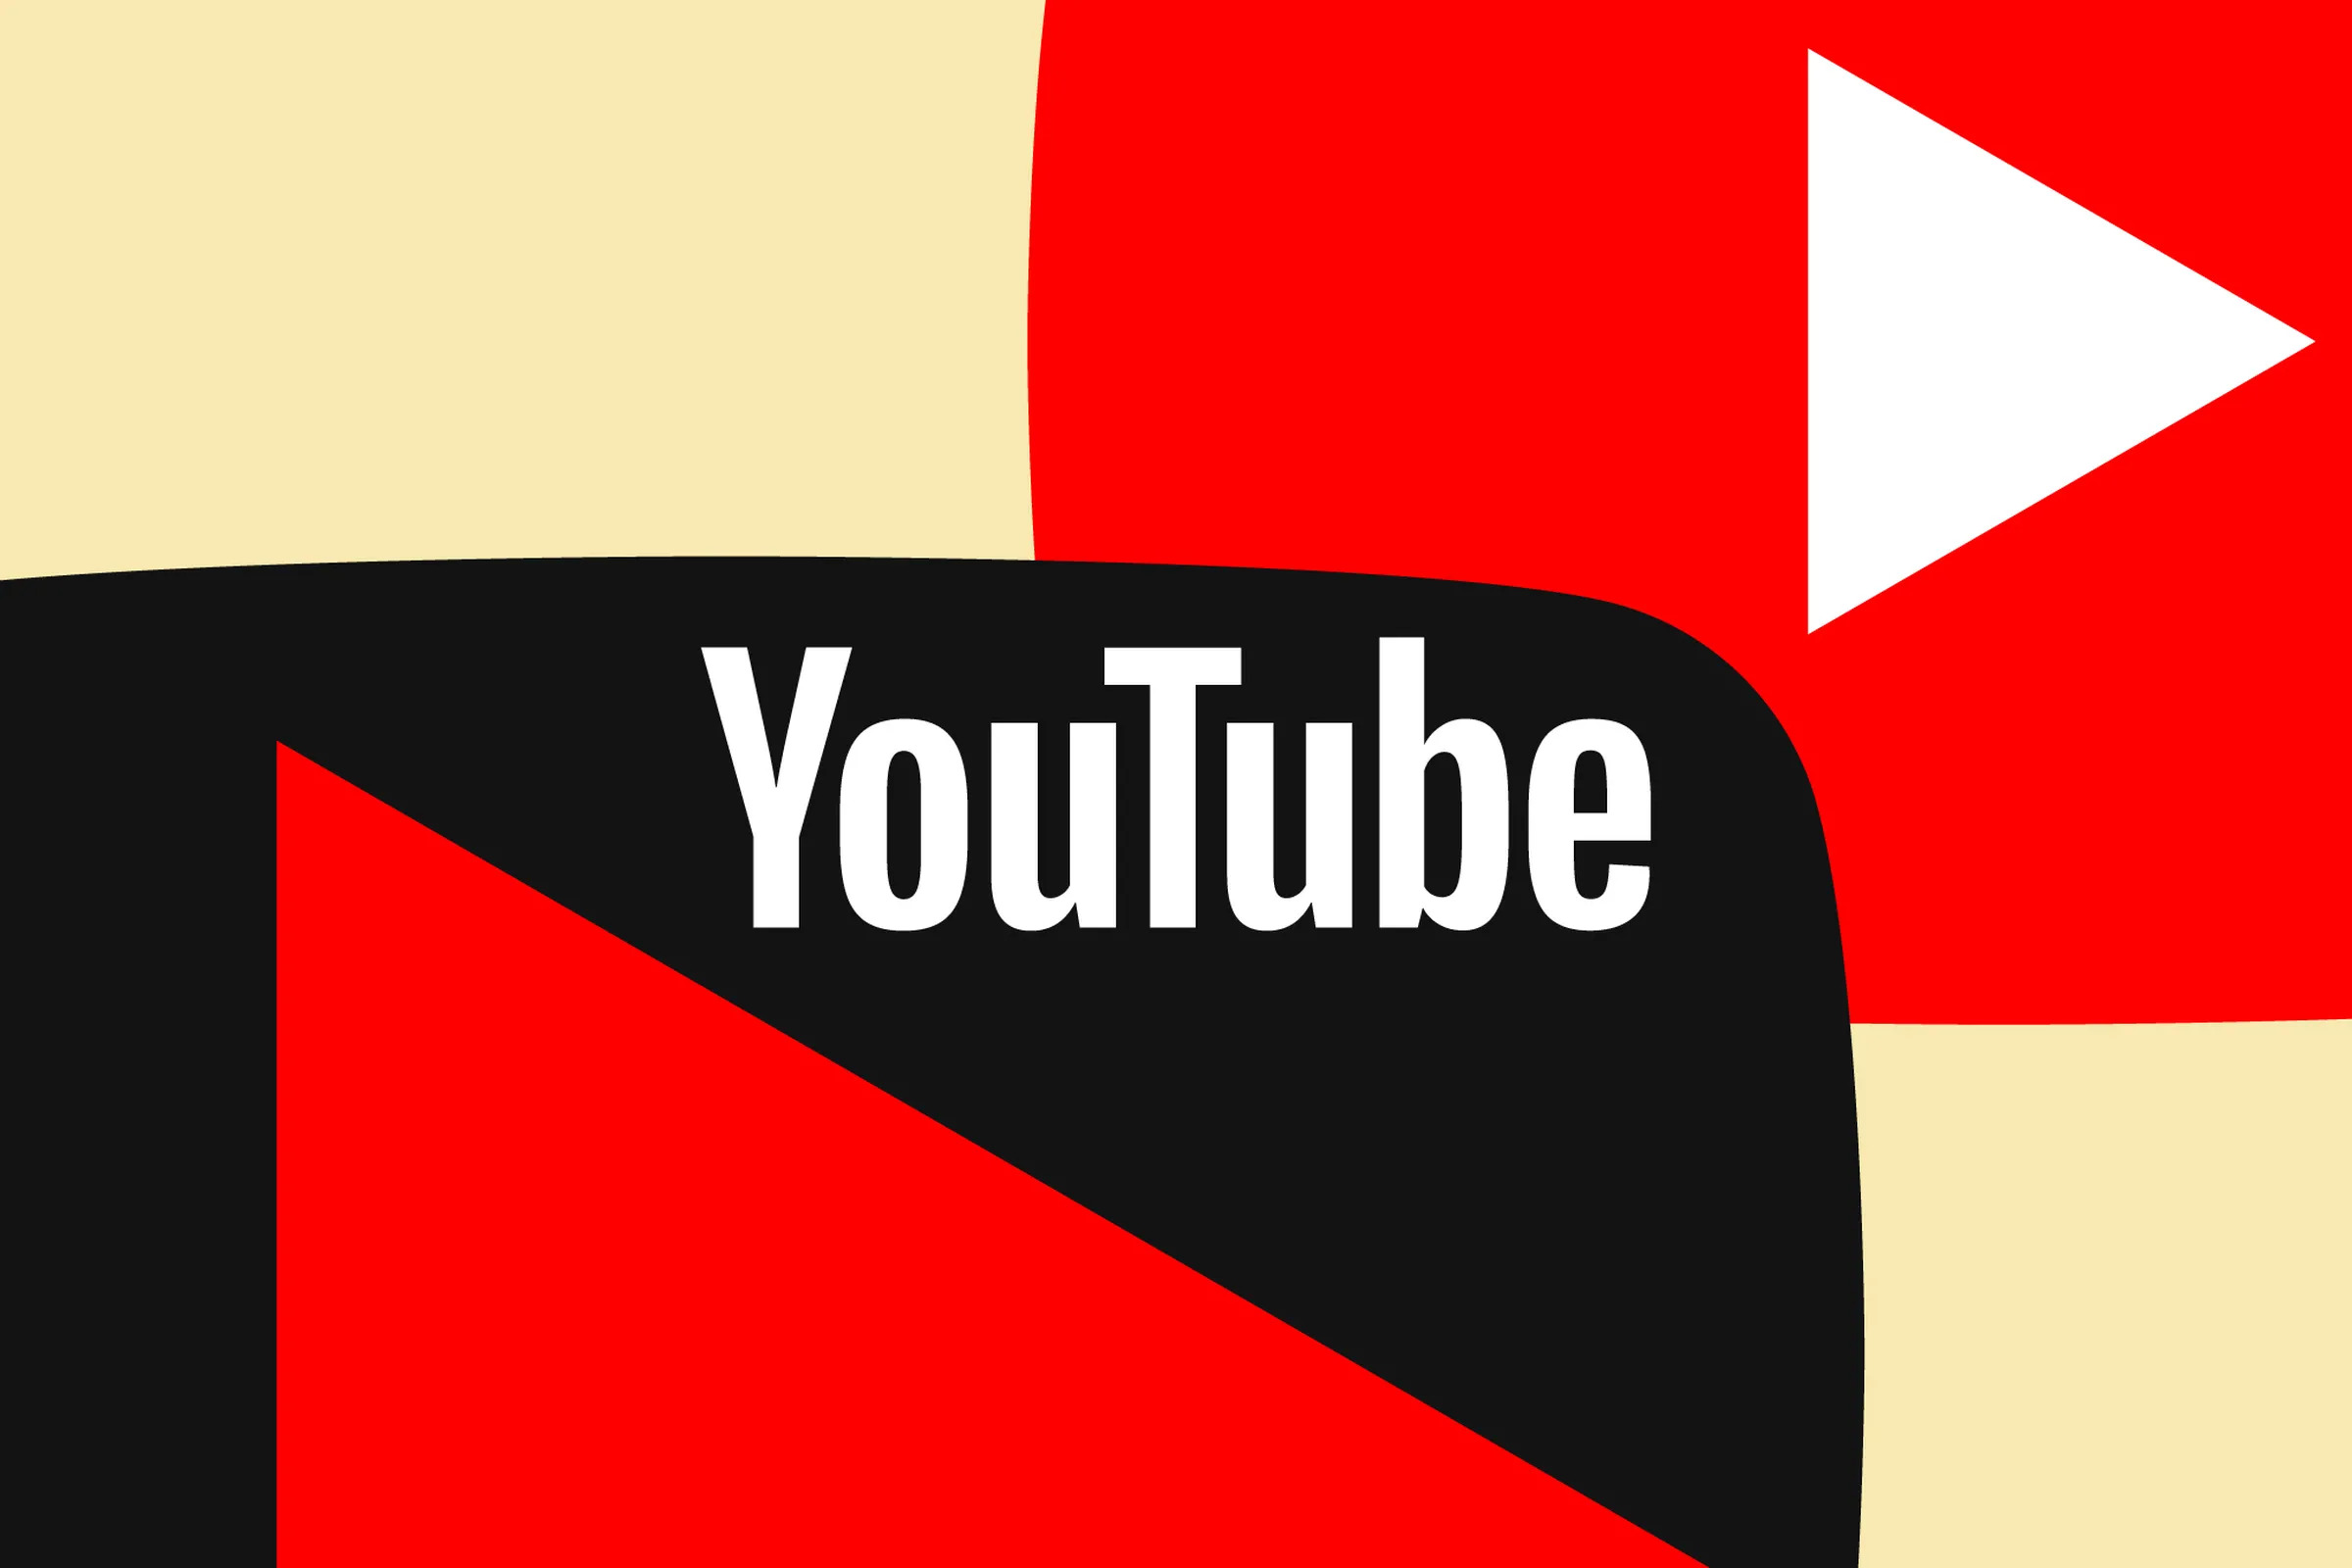 YouTube Clamps Down on Third-Party Apps Such as ReVanced